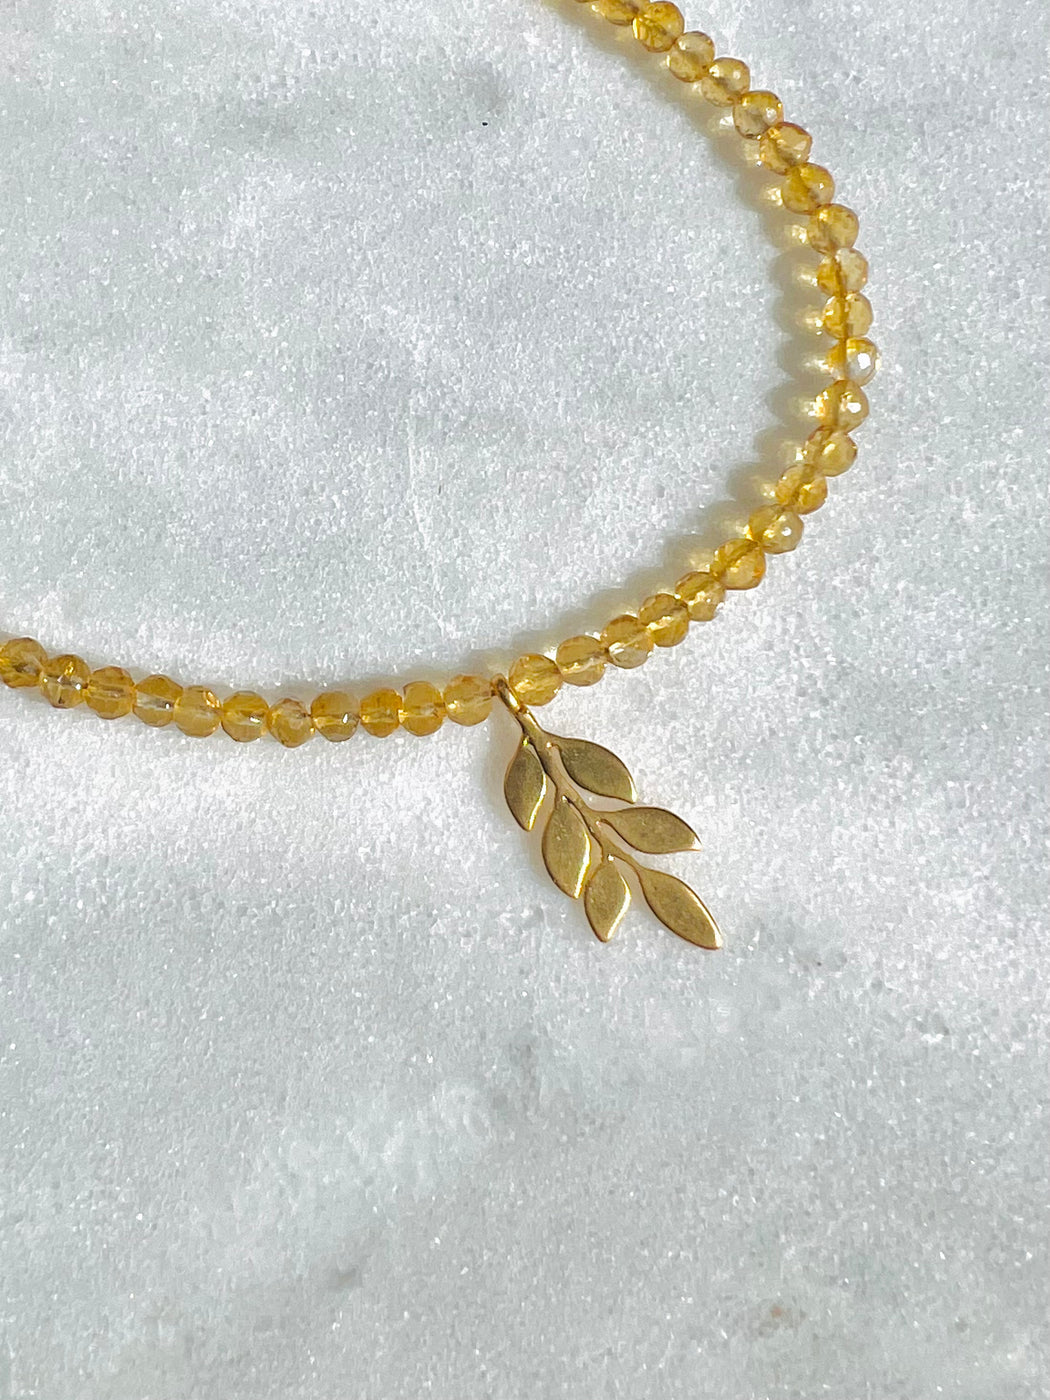 Citrine Necklace - strung on gold coated wire with gold fill clasp. Accented with Leaf charm. PUNKWASP by Carrie marill